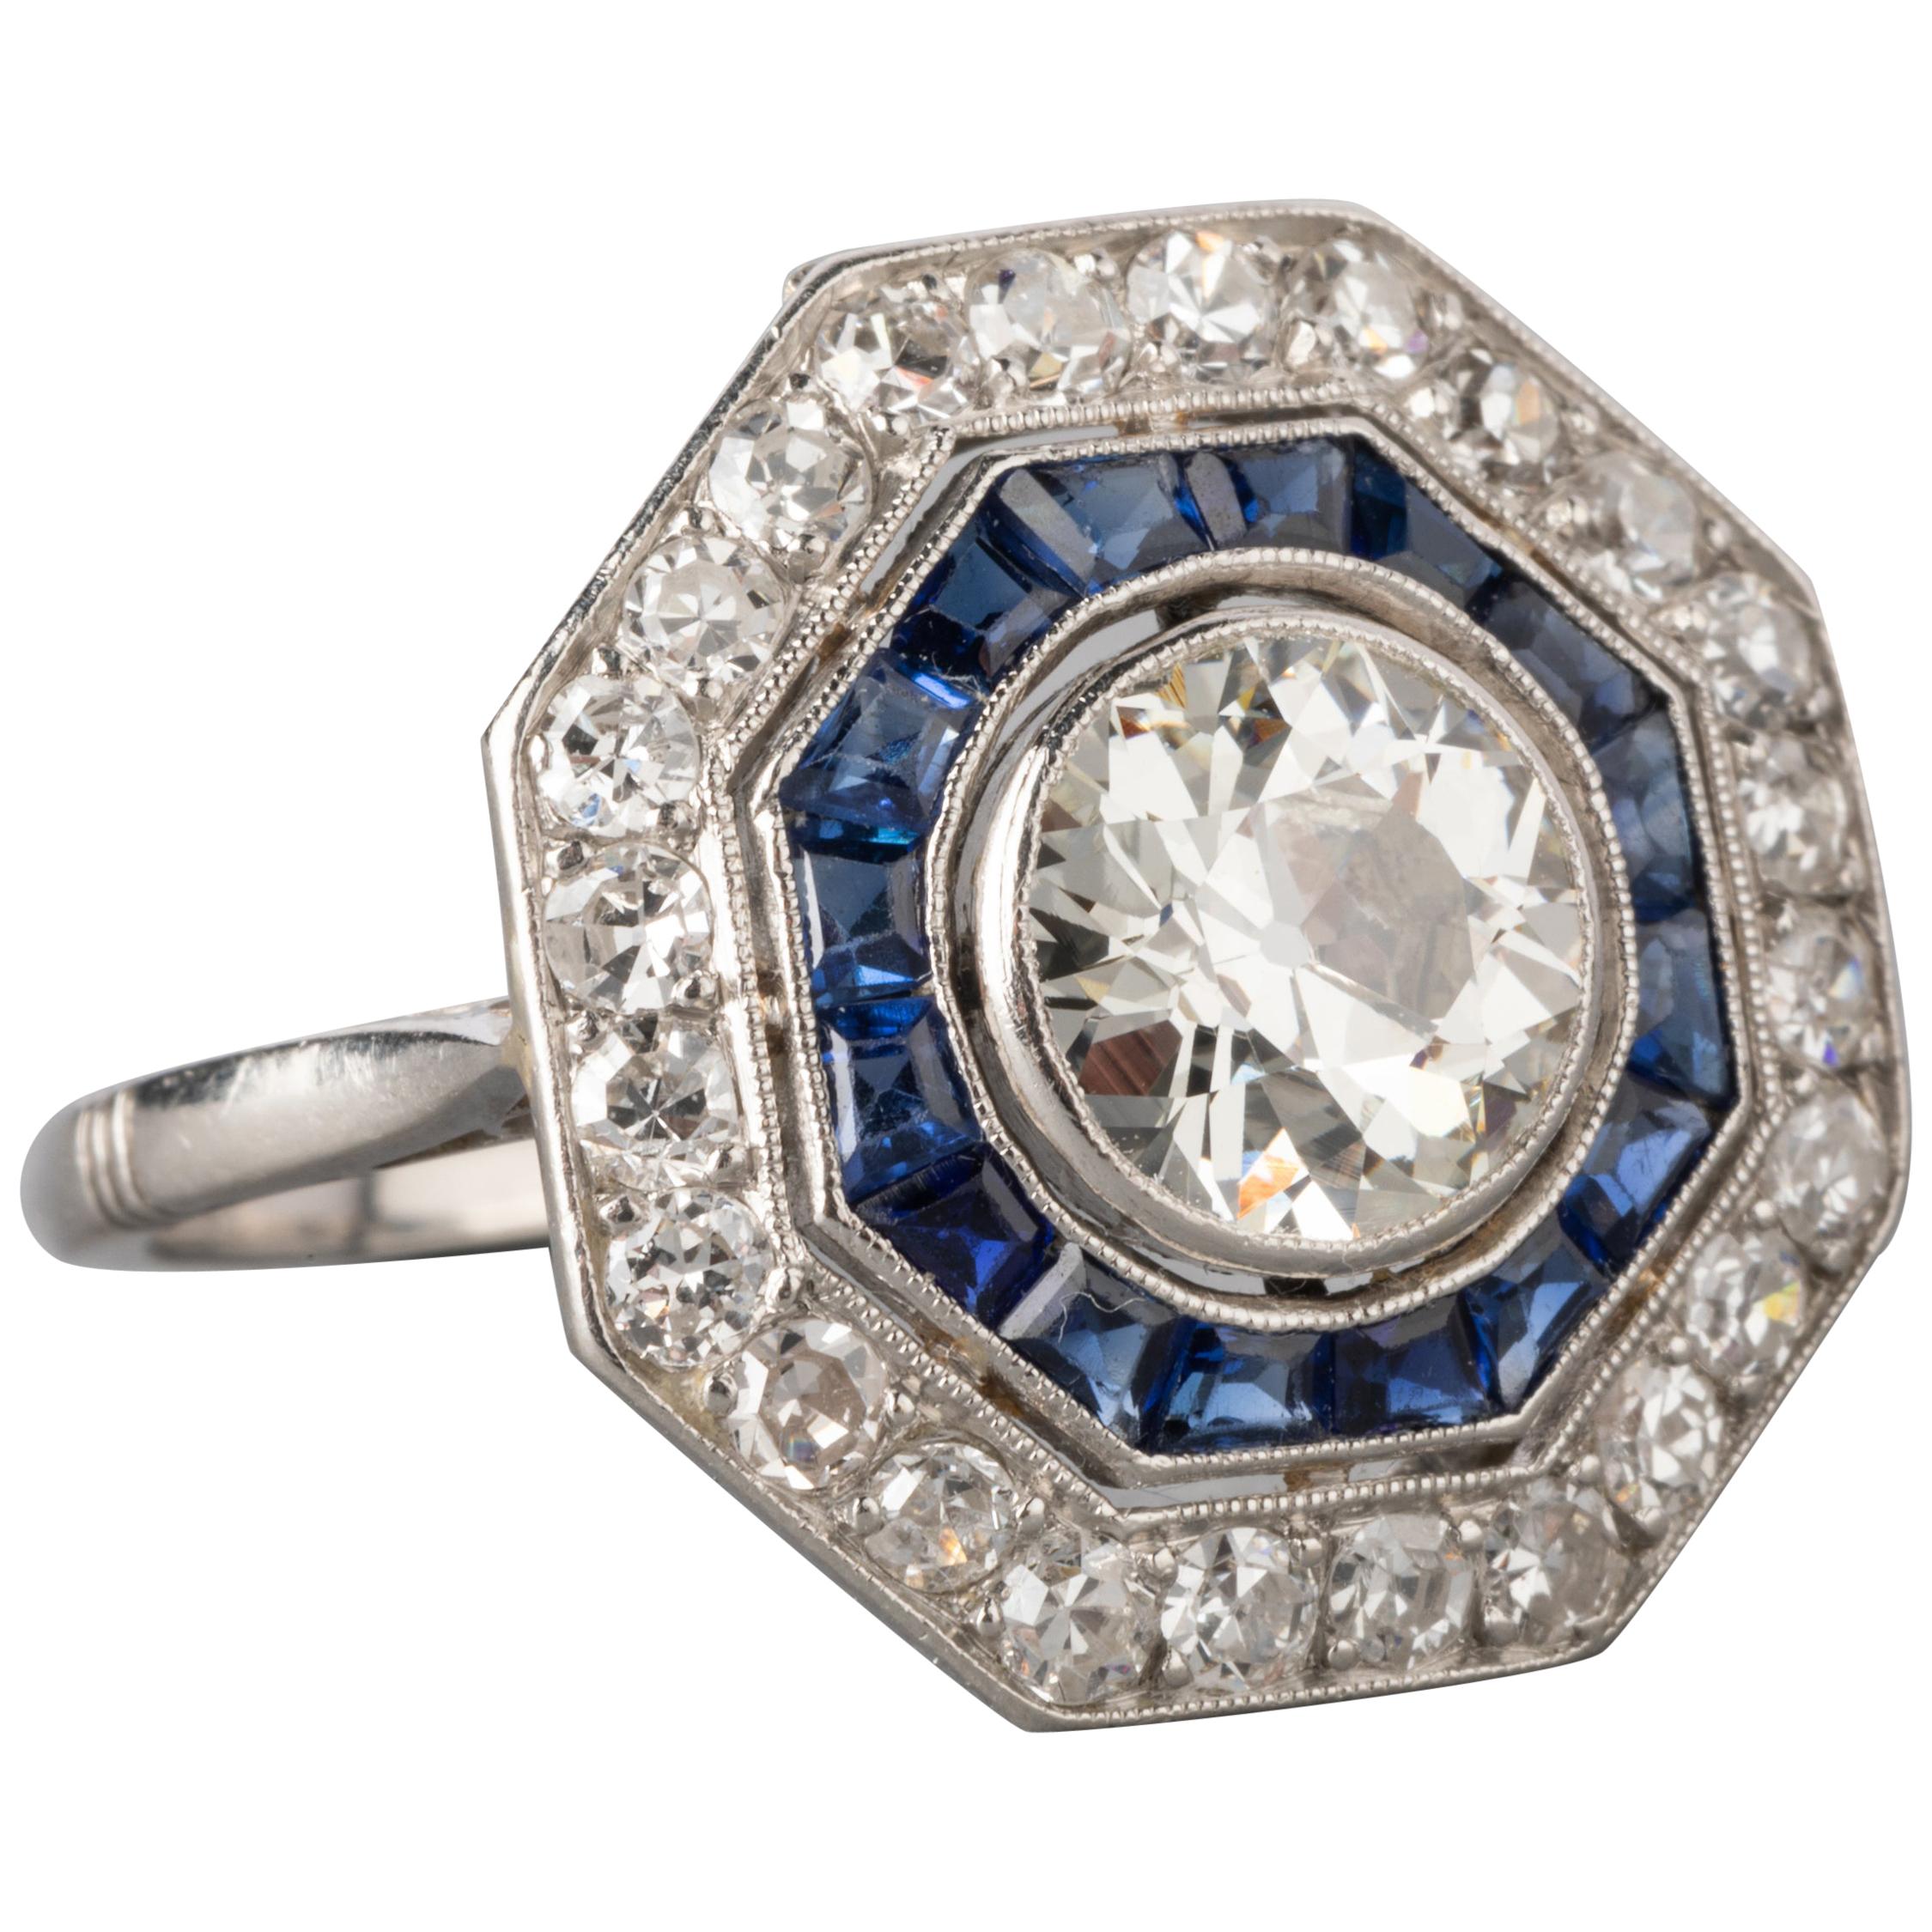 2.70 Carat Diamonds and Sapphires French Art Deco Ring